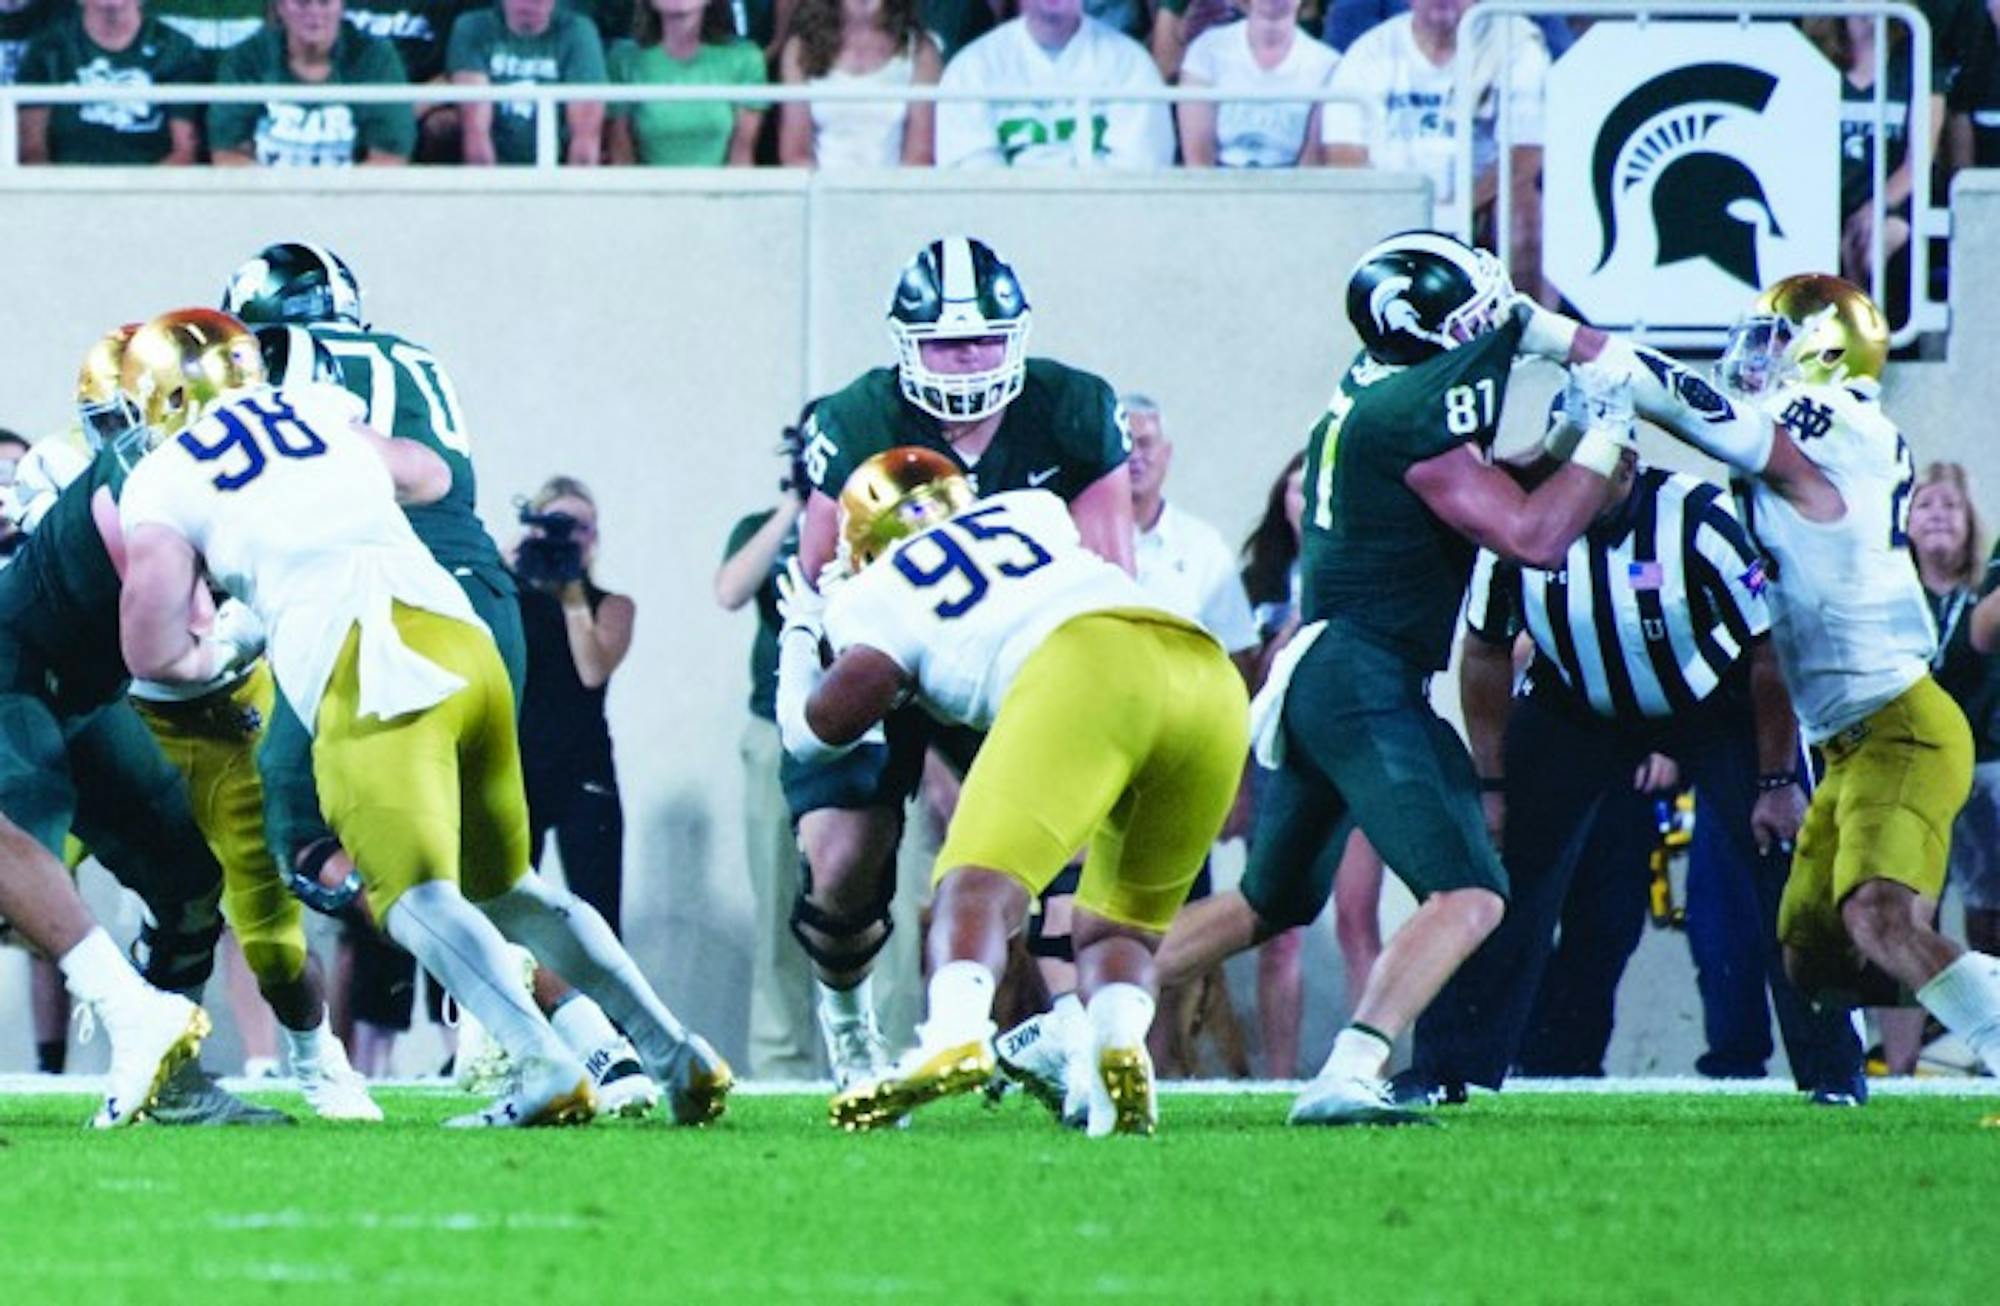 Irish freshman defensive line Myron Tagovailoa-Amosa tackles an opponent during Notre Dame's 38-18 win over Michigan State on Saturday in East Lansing, Michigan.